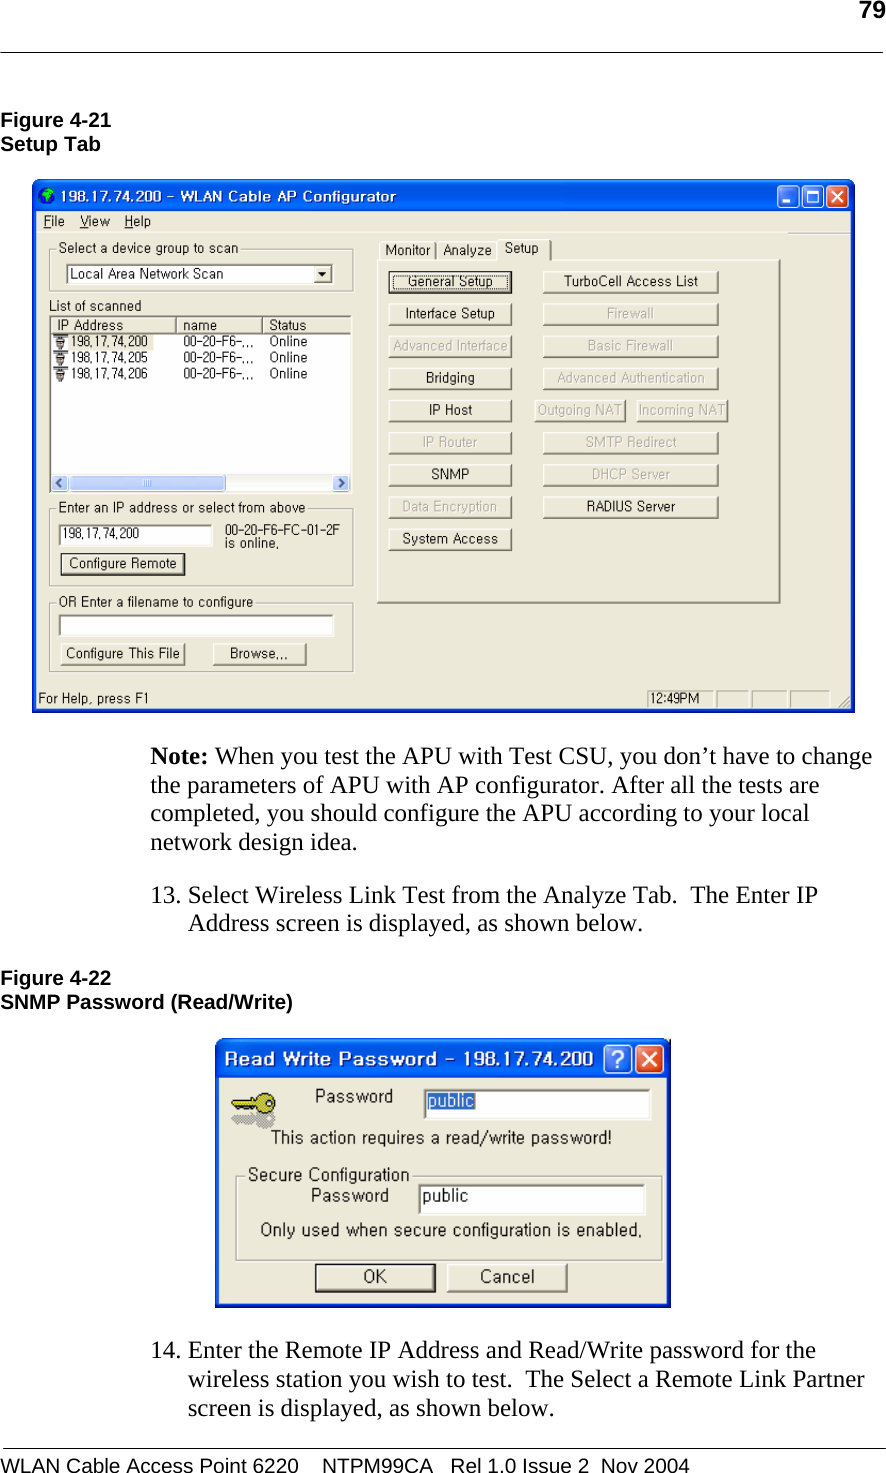   79  WLAN Cable Access Point 6220    NTPM99CA   Rel 1.0 Issue 2  Nov 2004 Figure 4-21 Setup Tab     Note: When you test the APU with Test CSU, you don’t have to change the parameters of APU with AP configurator. After all the tests are completed, you should configure the APU according to your local network design idea.    13. Select Wireless Link Test from the Analyze Tab.  The Enter IP Address screen is displayed, as shown below.  Figure 4-22 SNMP Password (Read/Write)    14. Enter the Remote IP Address and Read/Write password for the wireless station you wish to test.  The Select a Remote Link Partner screen is displayed, as shown below. 